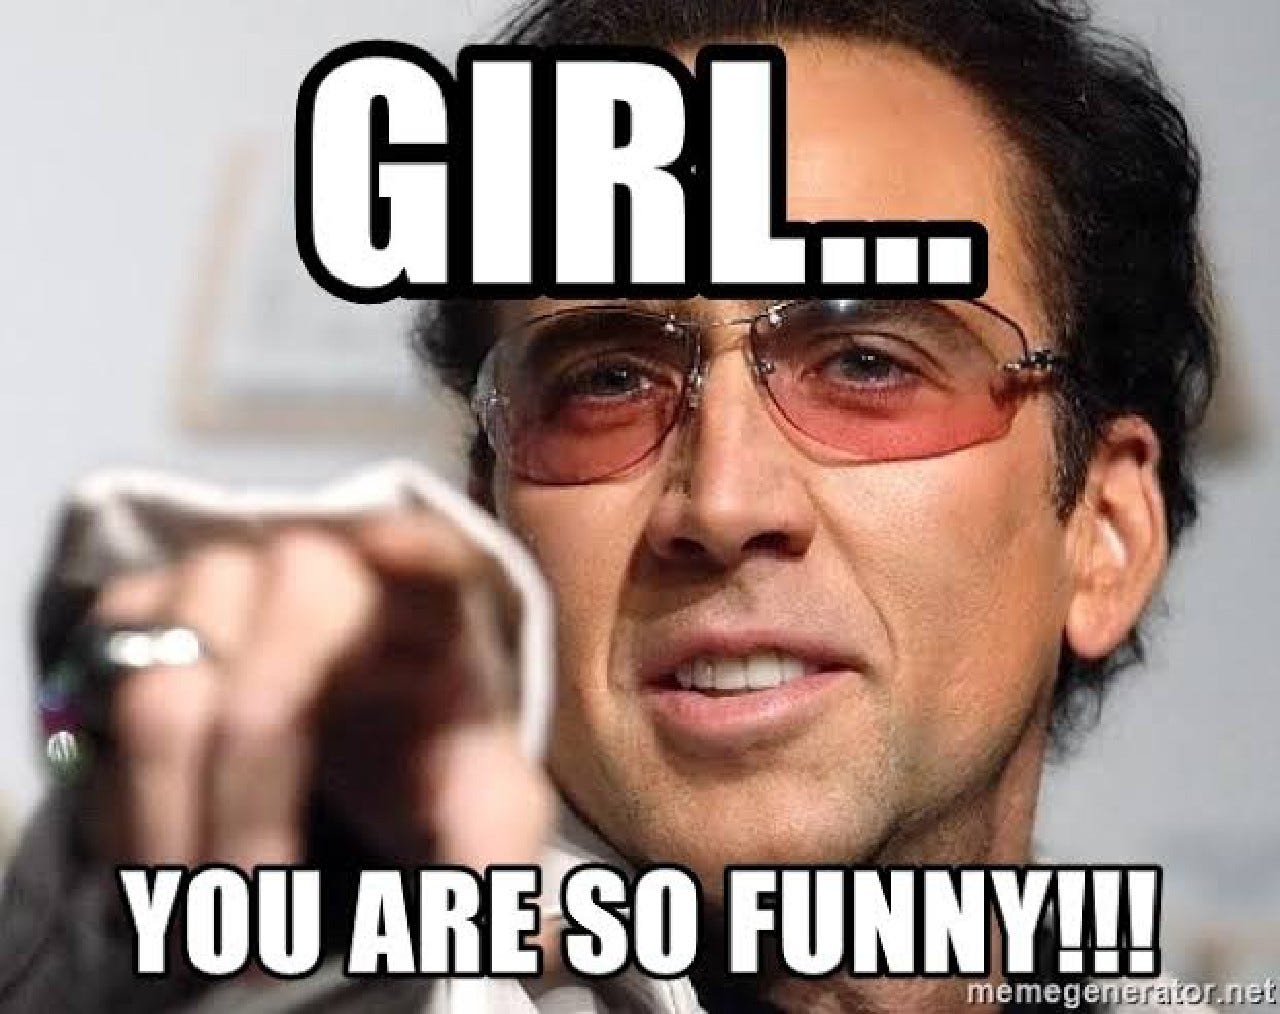 Nicholas Cage pointing with caption GiRL You are so funny!